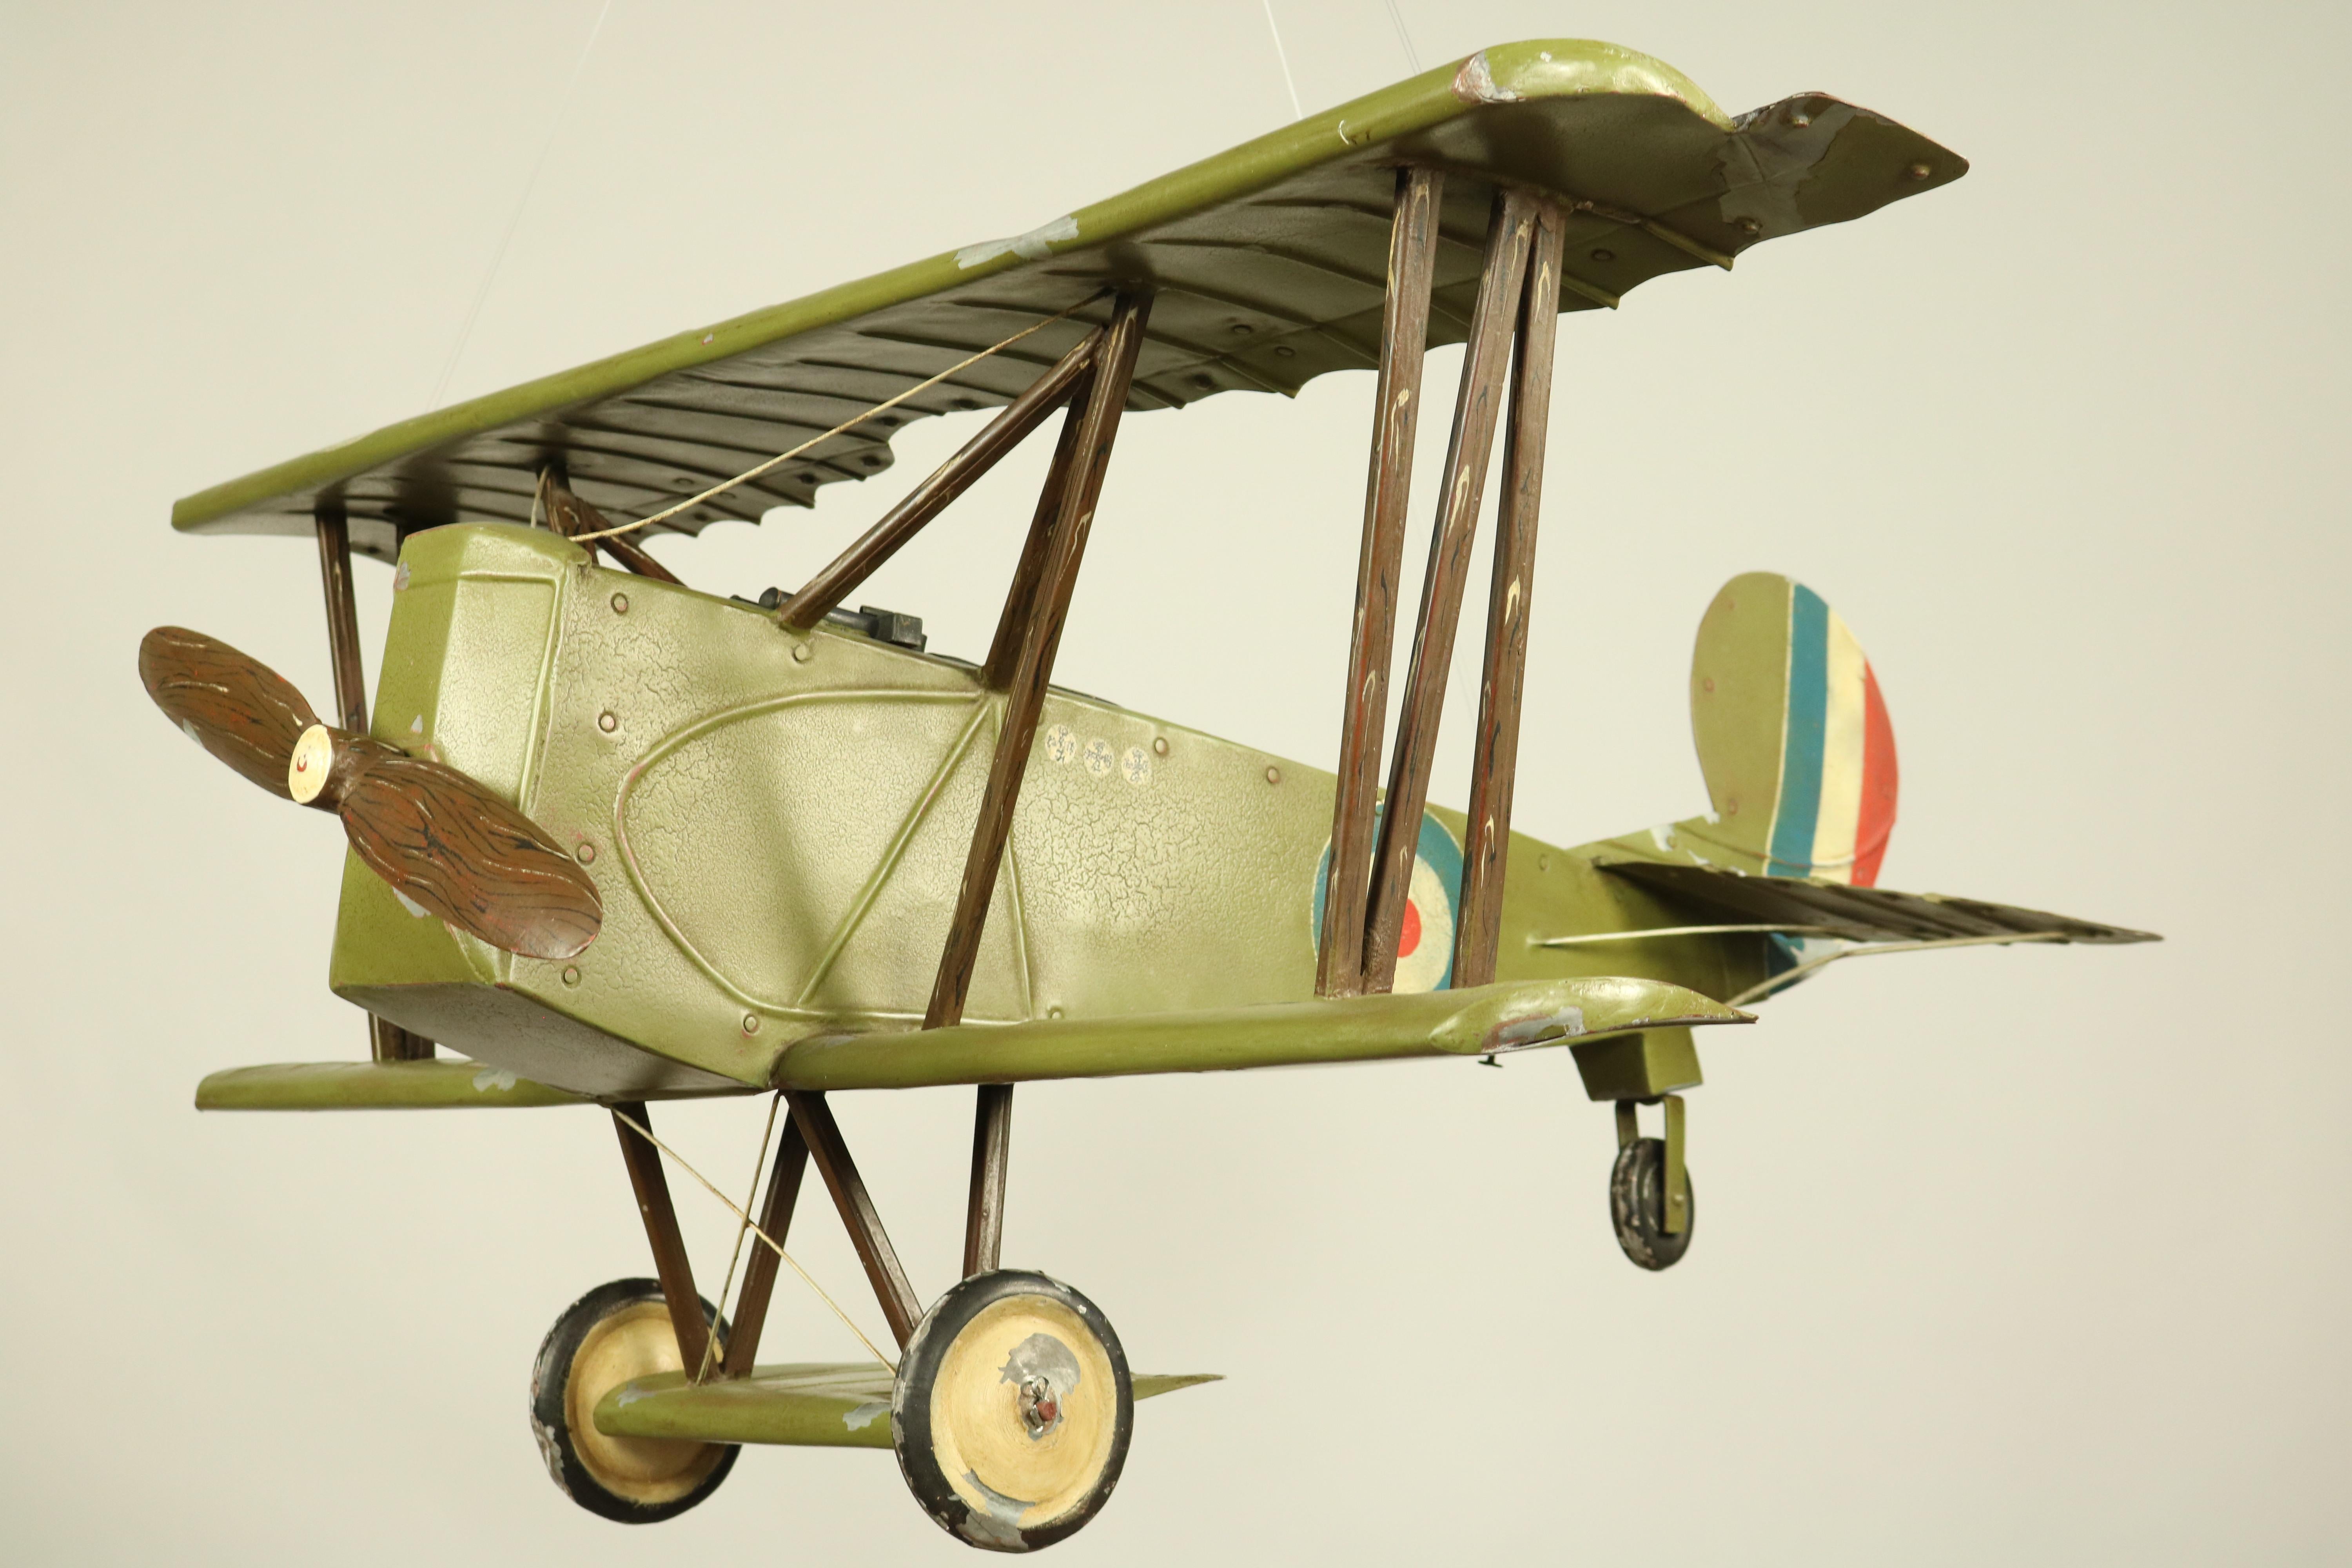 Huge stunning World War 1 Royal Air Force biplane totally made of metal plate.
This airplane model is possible to hung down from the ceiling or standing on a desk, both the propeller and the wheels can be turned,
on the hull with three Eiserne